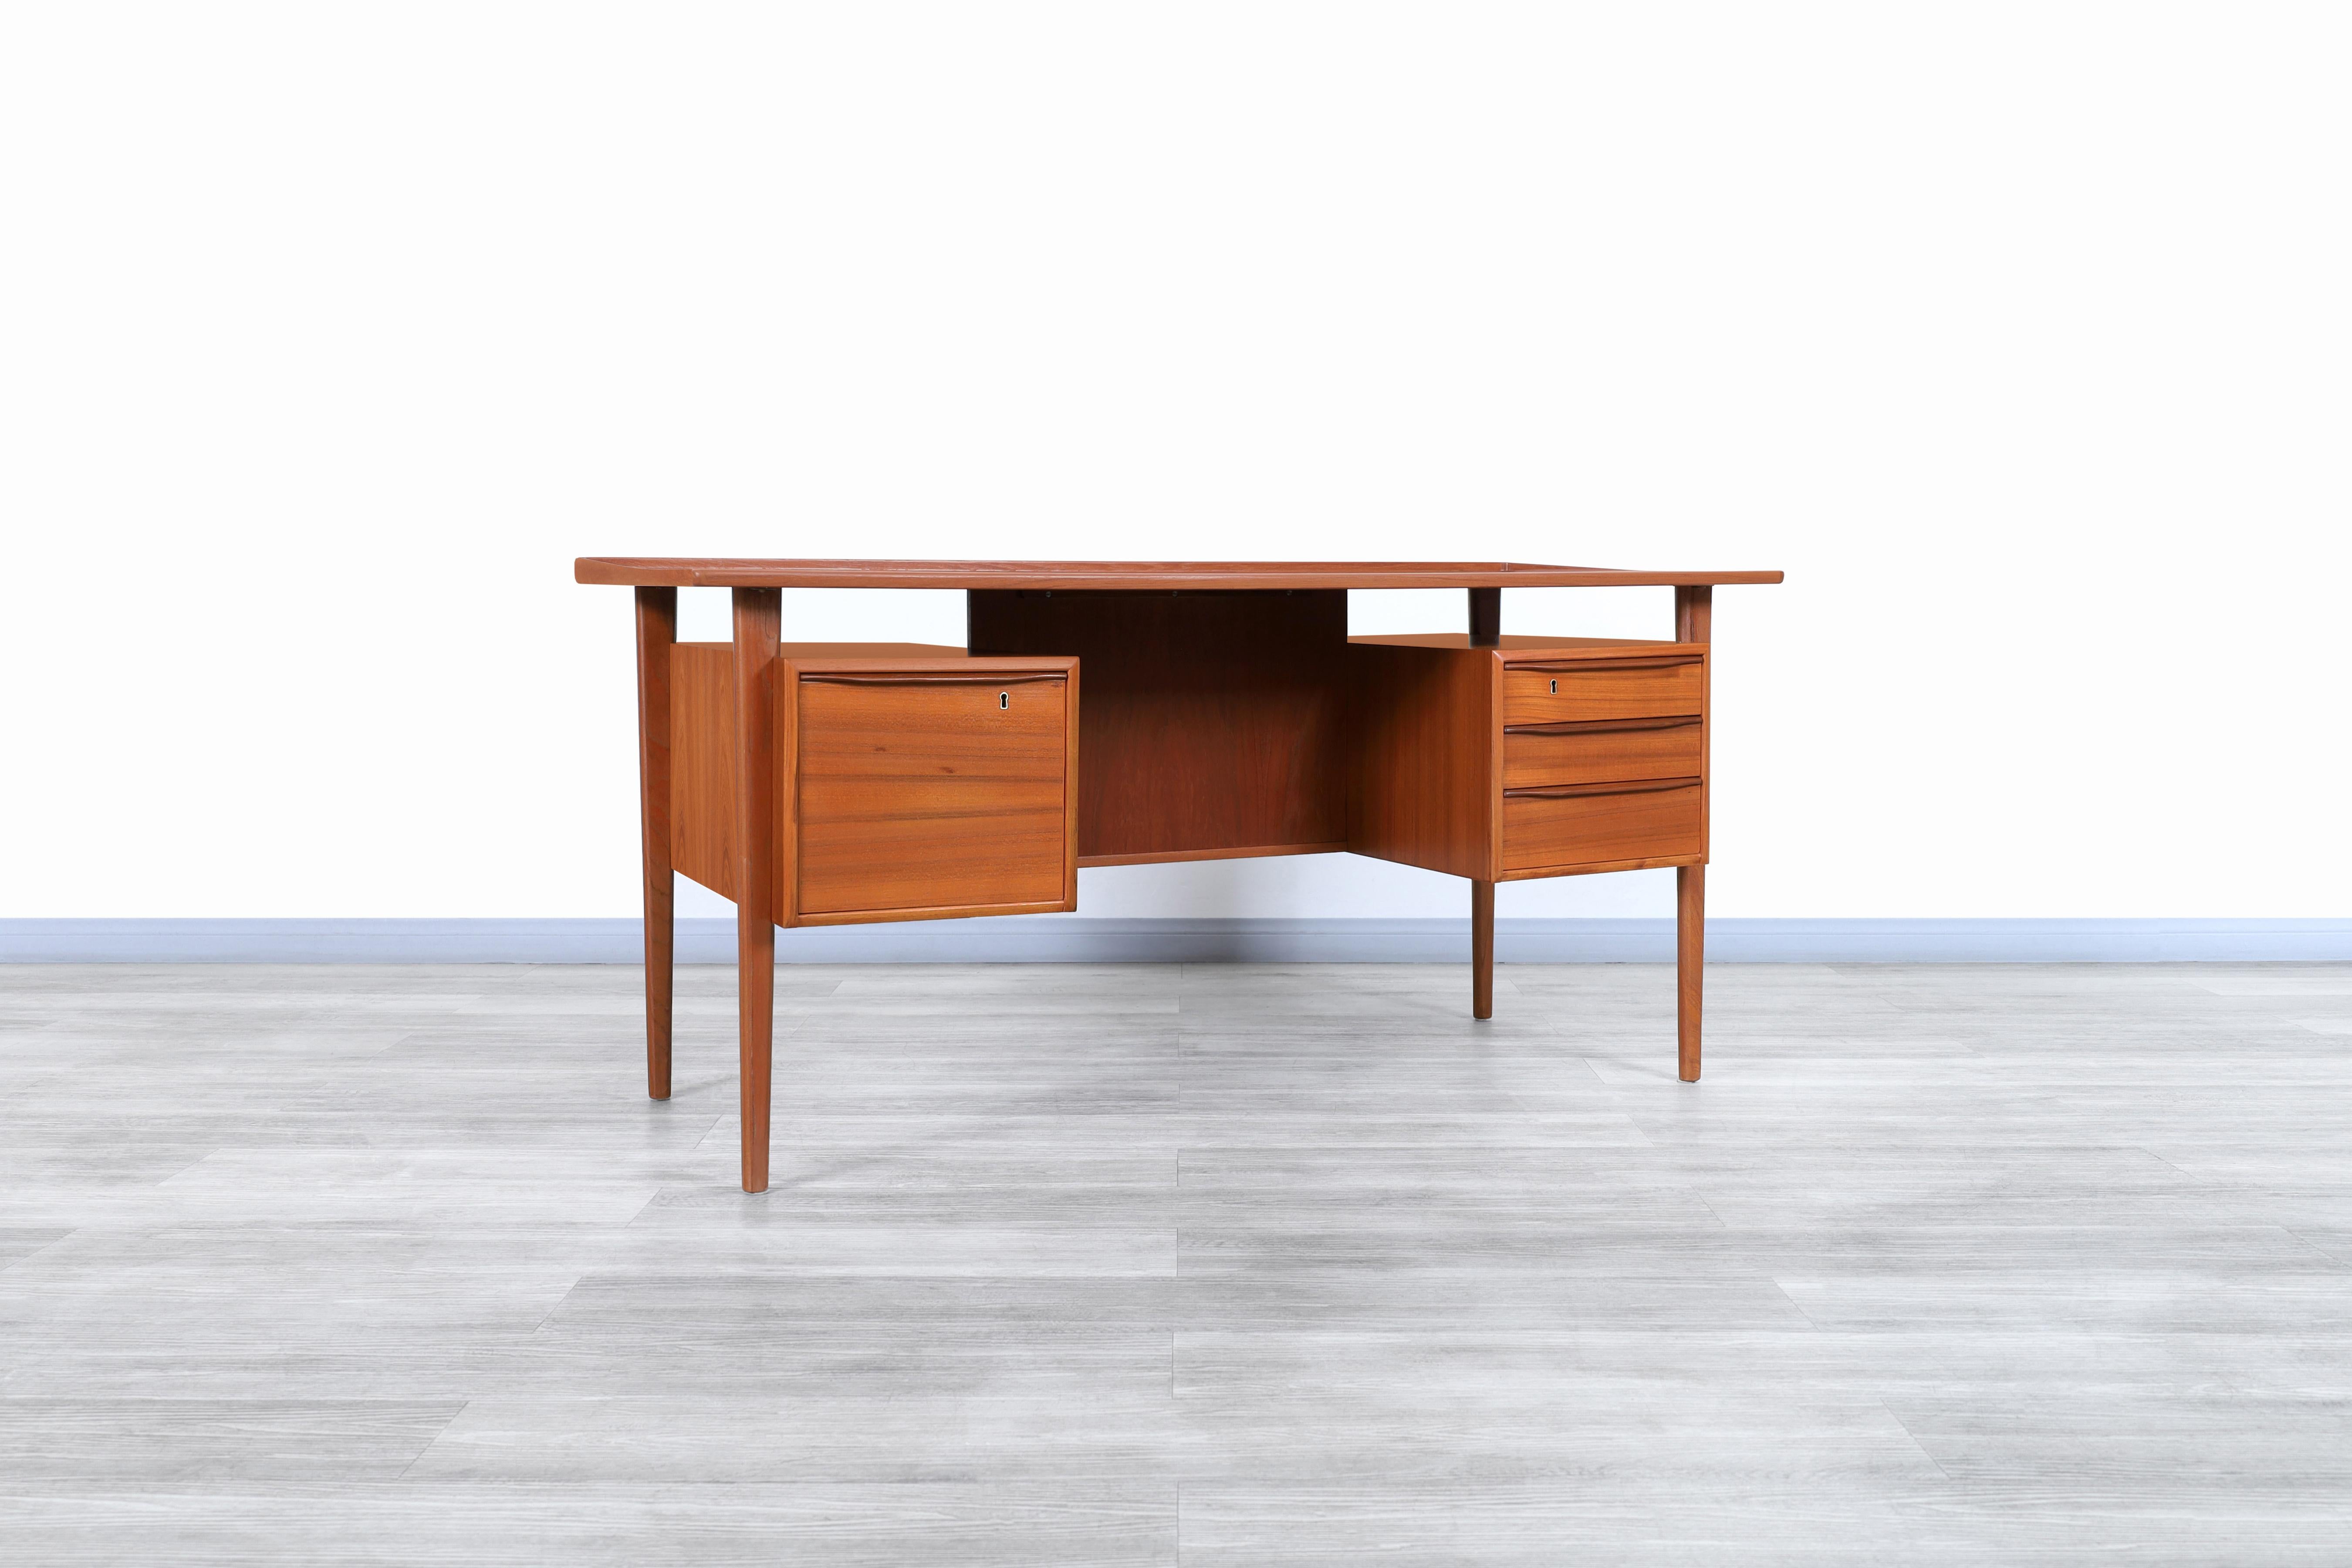 Fabulous Danish modern floating top teak desk designed by Løvig Nielsen for Løvig Dansk in Denmark, circa 1960s. Features a floating top design with a raised lip along the edges, which will offer you an excellent workspace. This desk has three